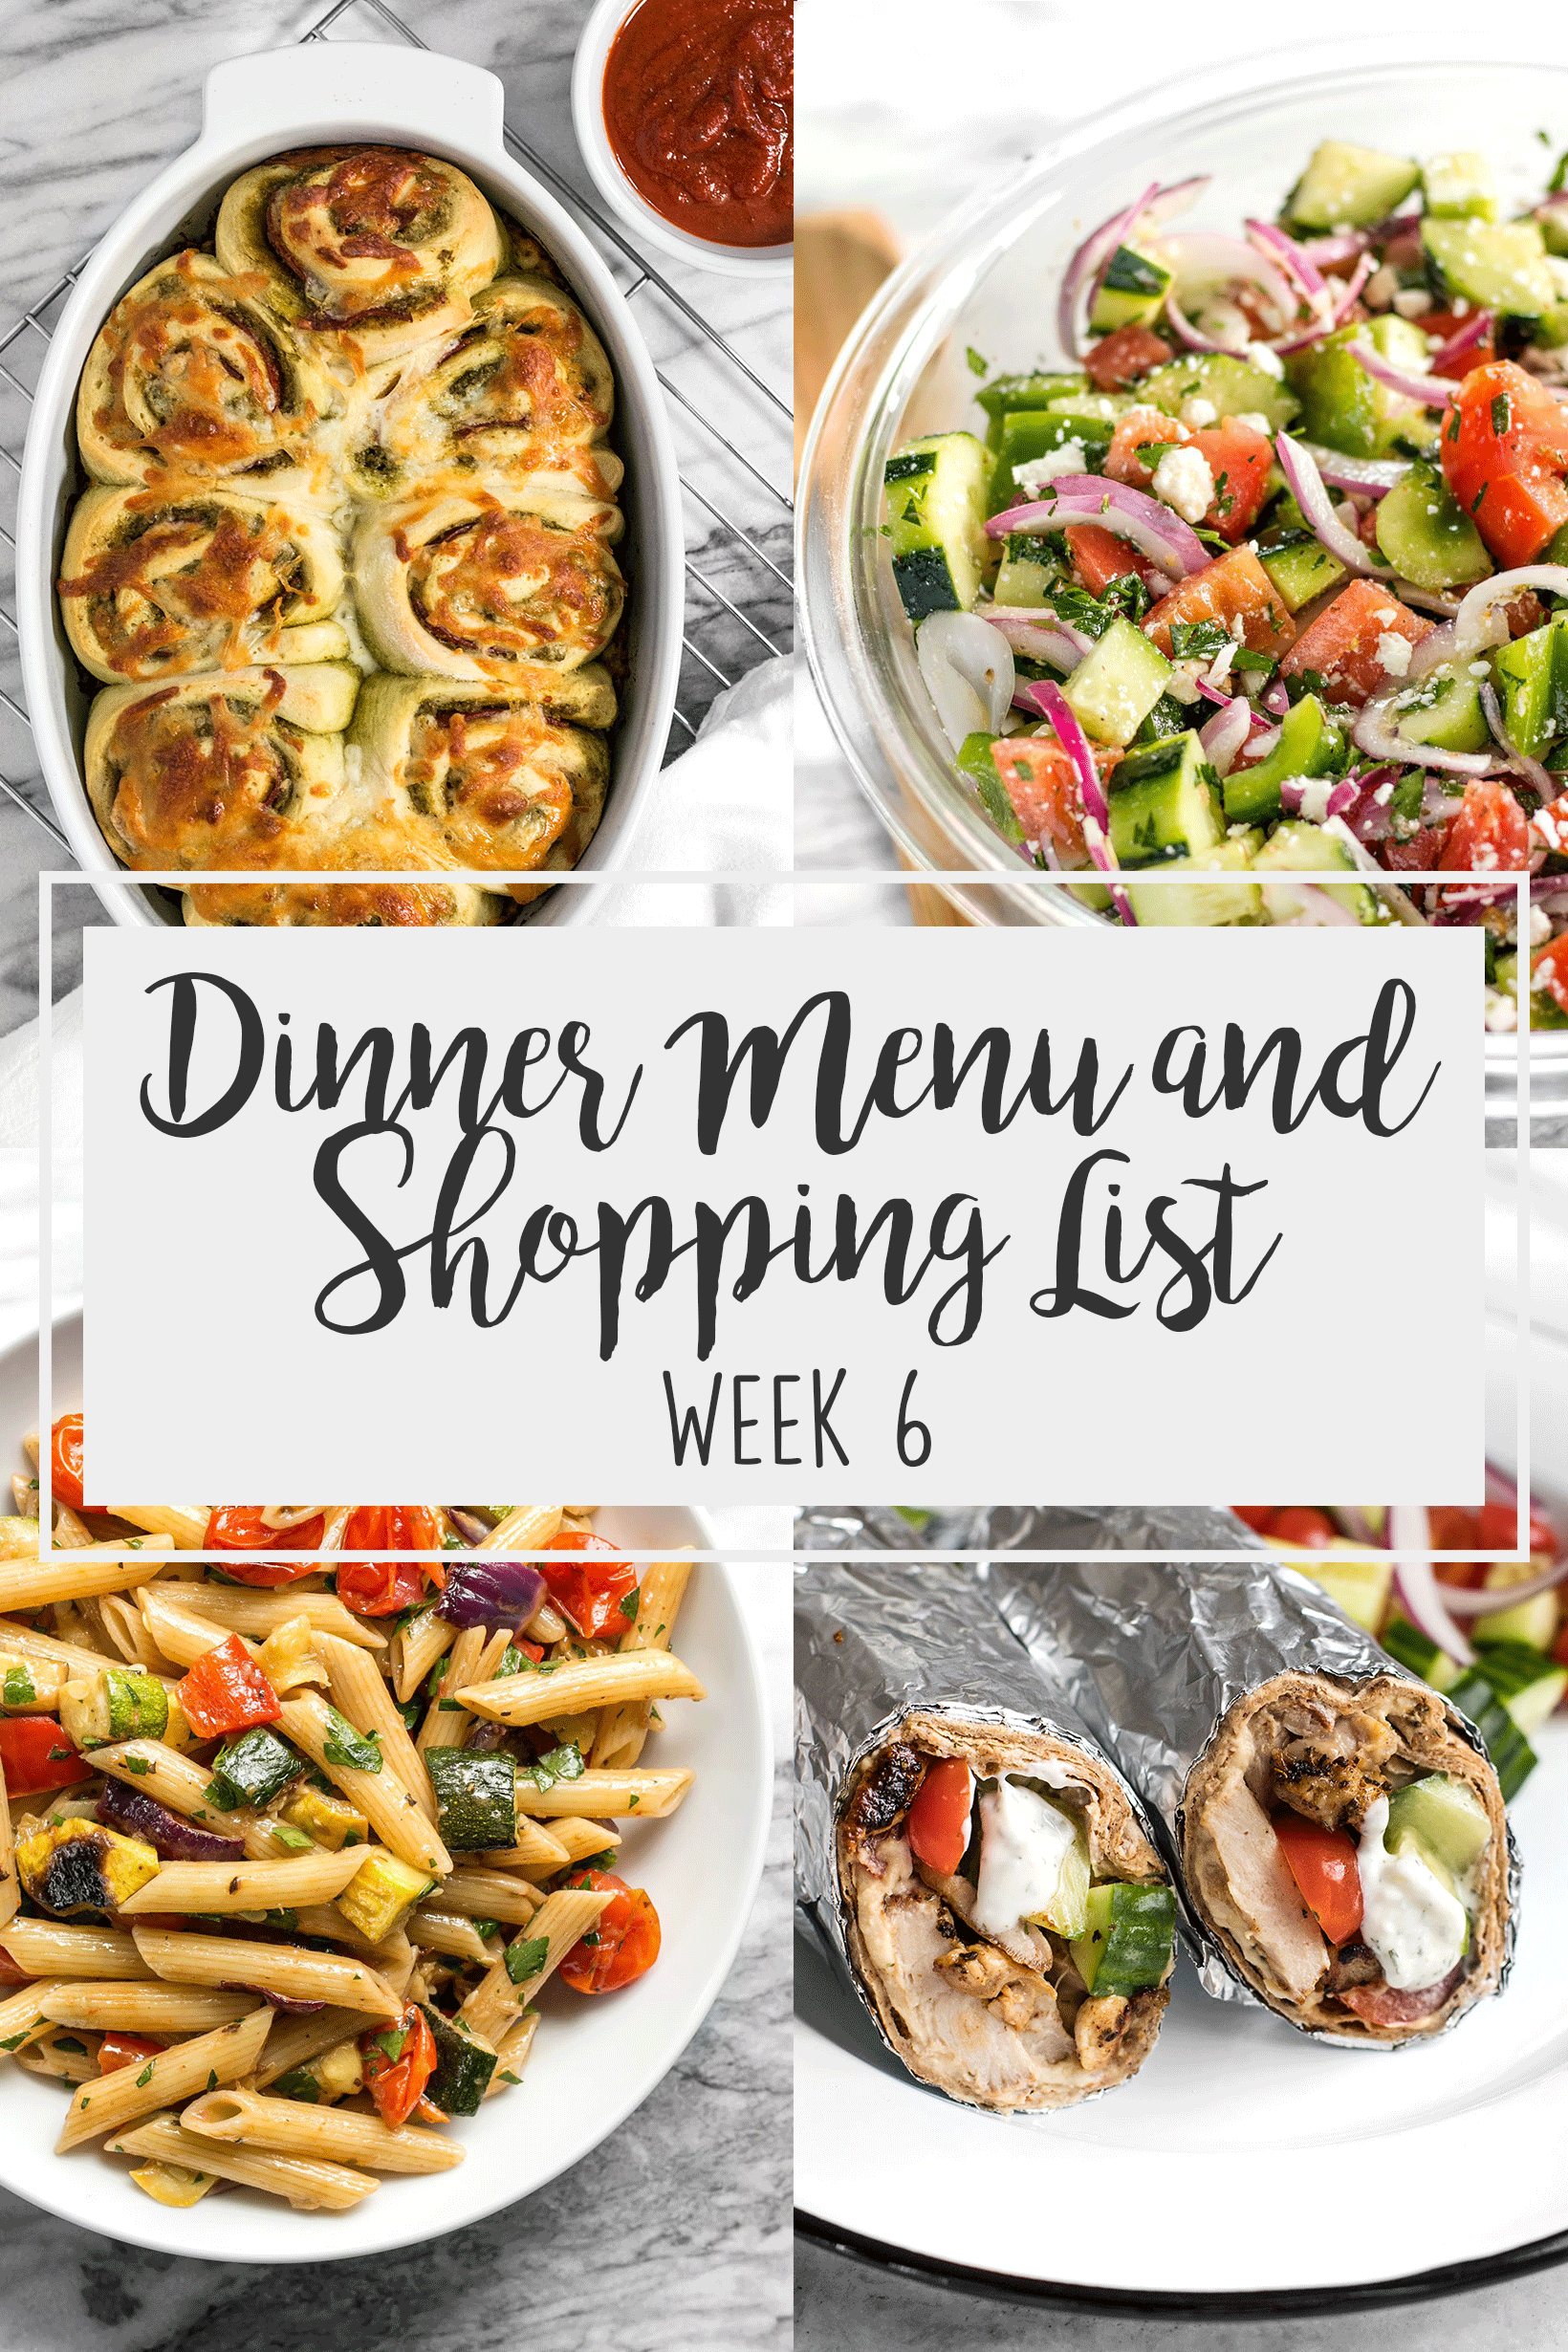 Weekly Menu and Shopping List 6